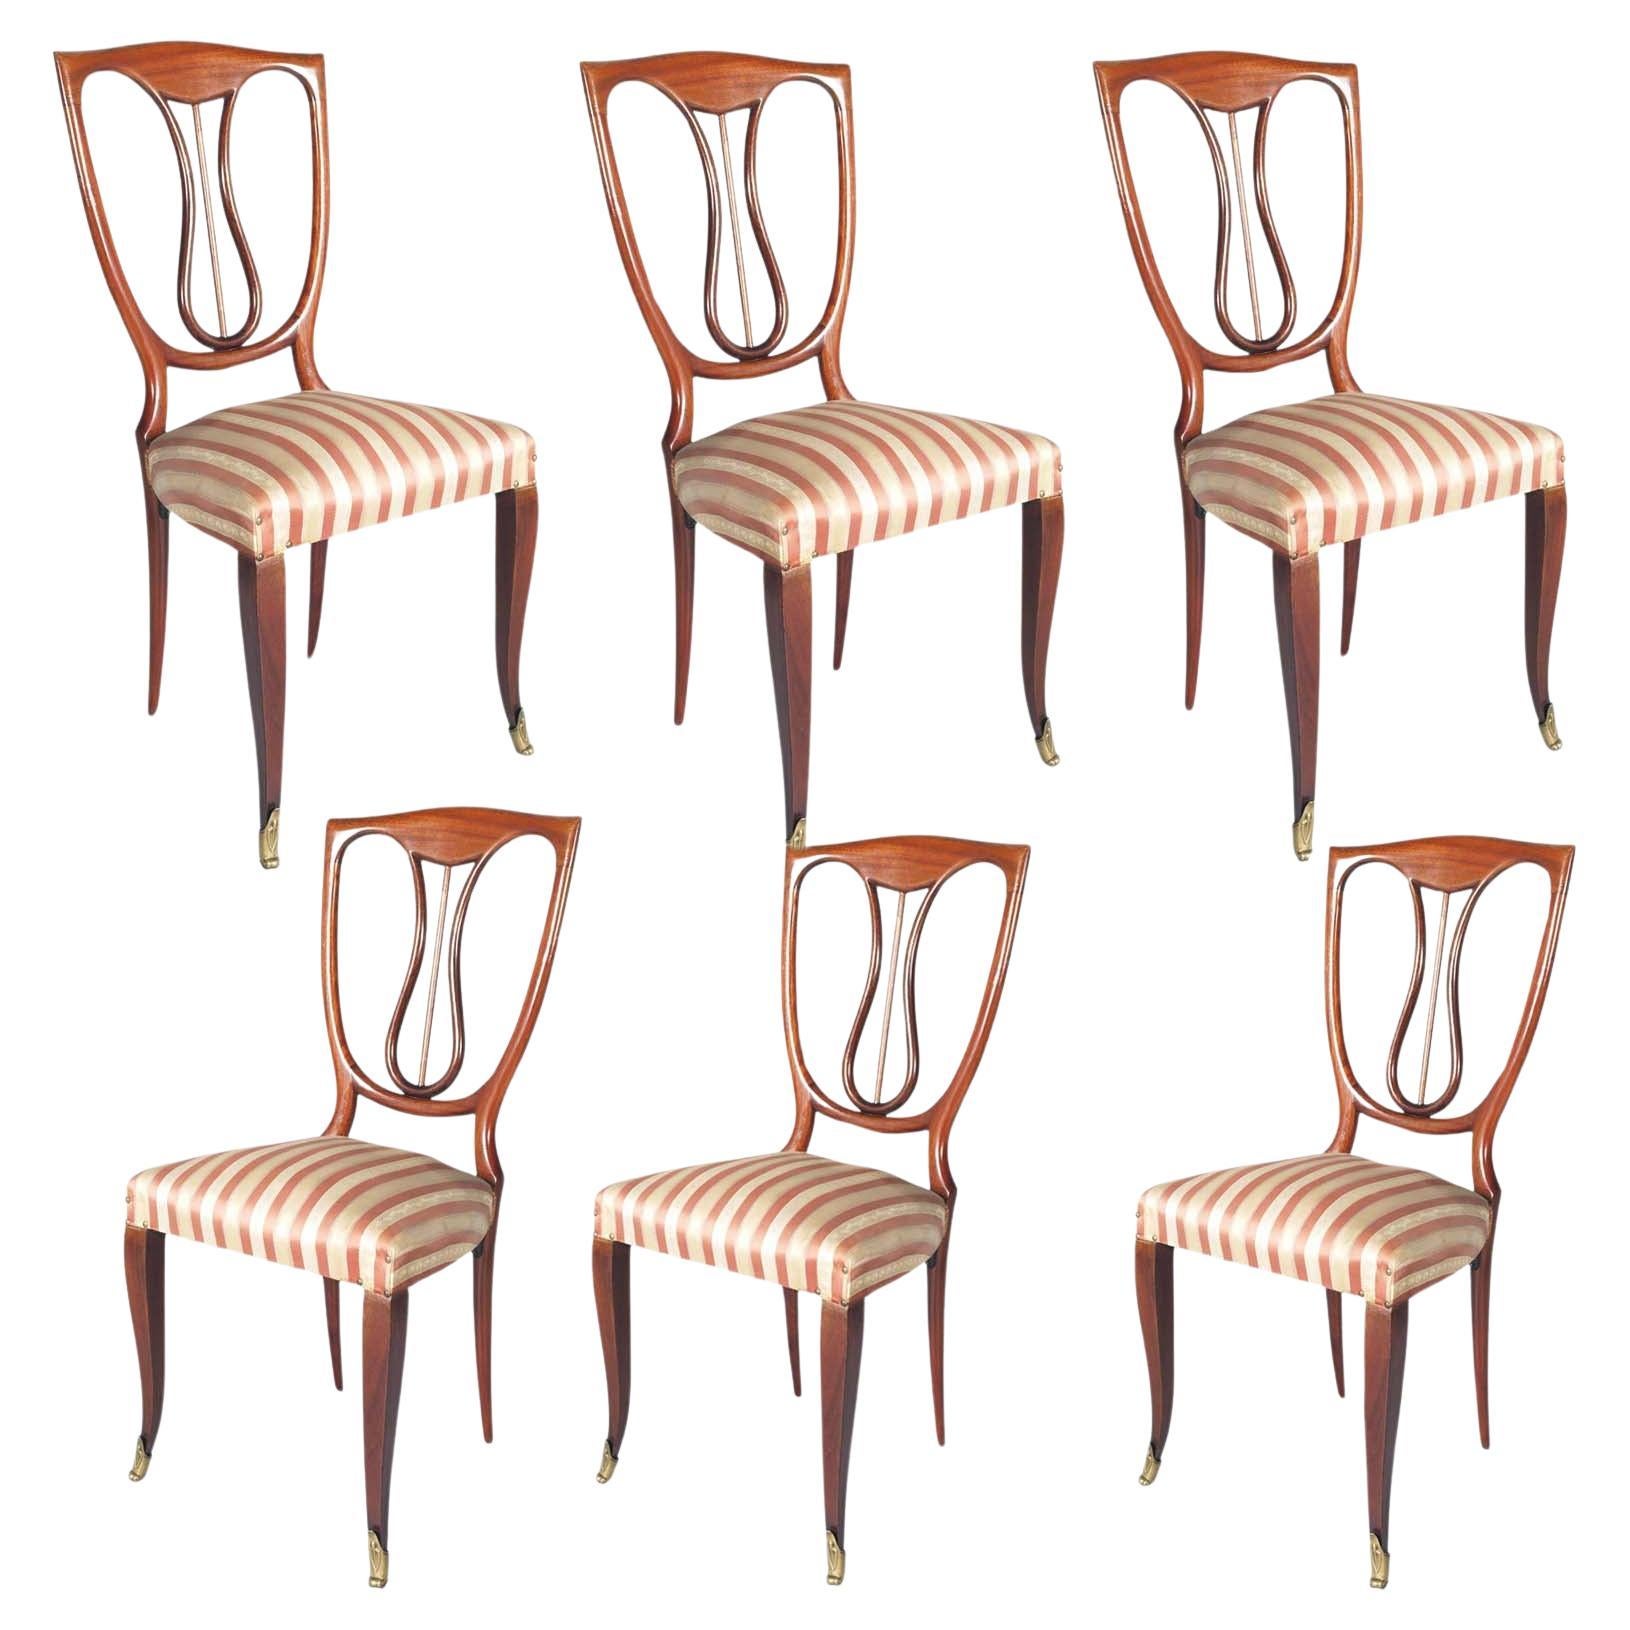 Six 1940s Chairs in Mahogany Melchiorre Bega attributed, by Galleria Mobili Arte For Sale